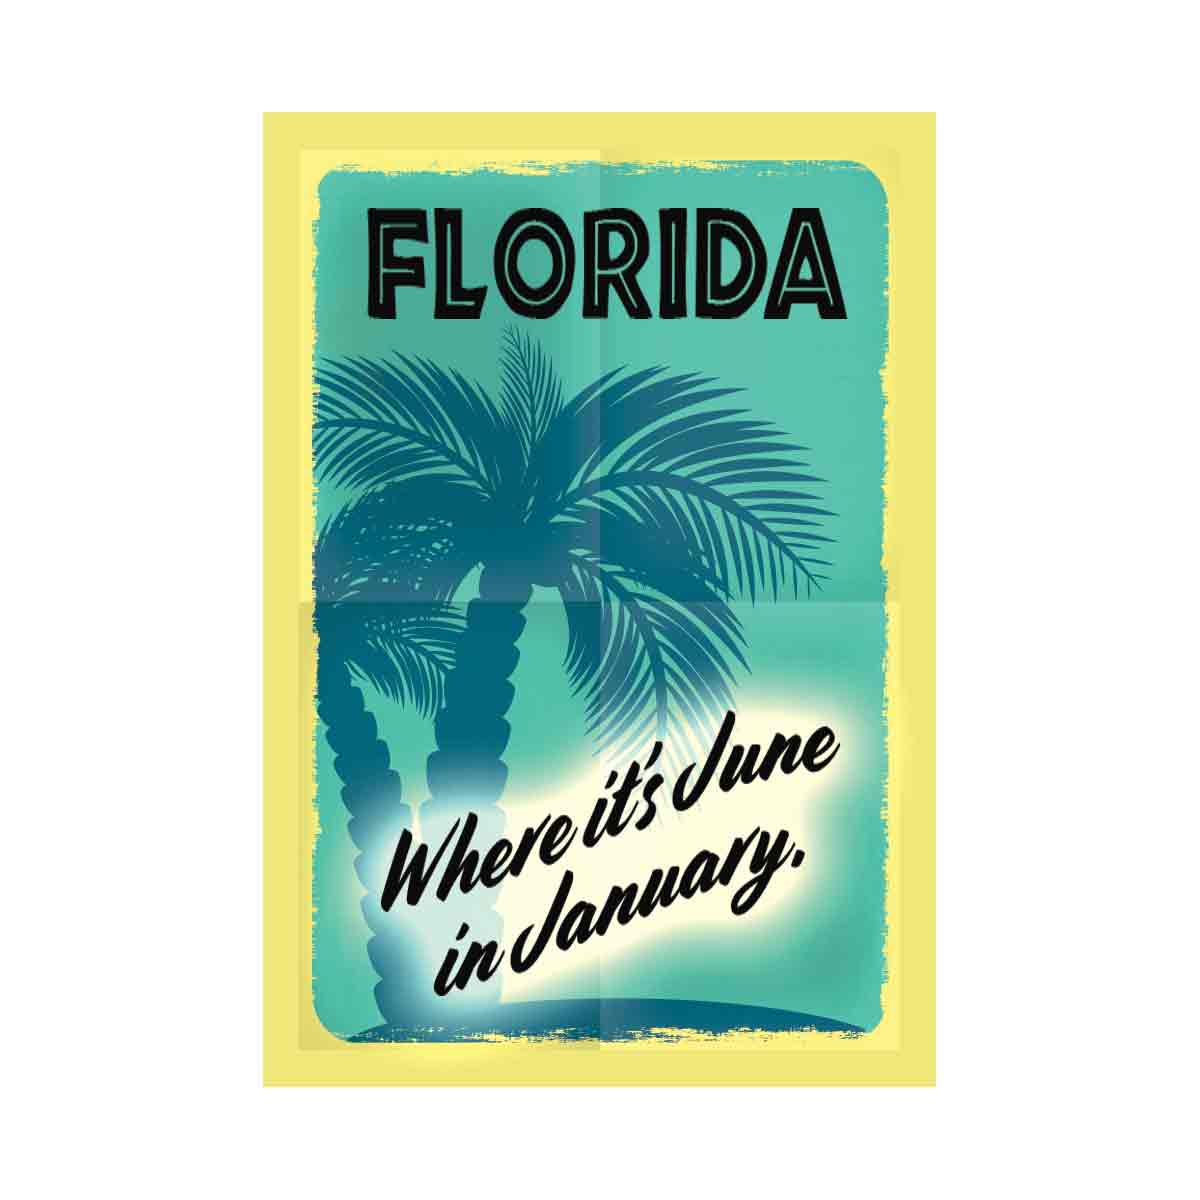 Where it is June in January - Florida